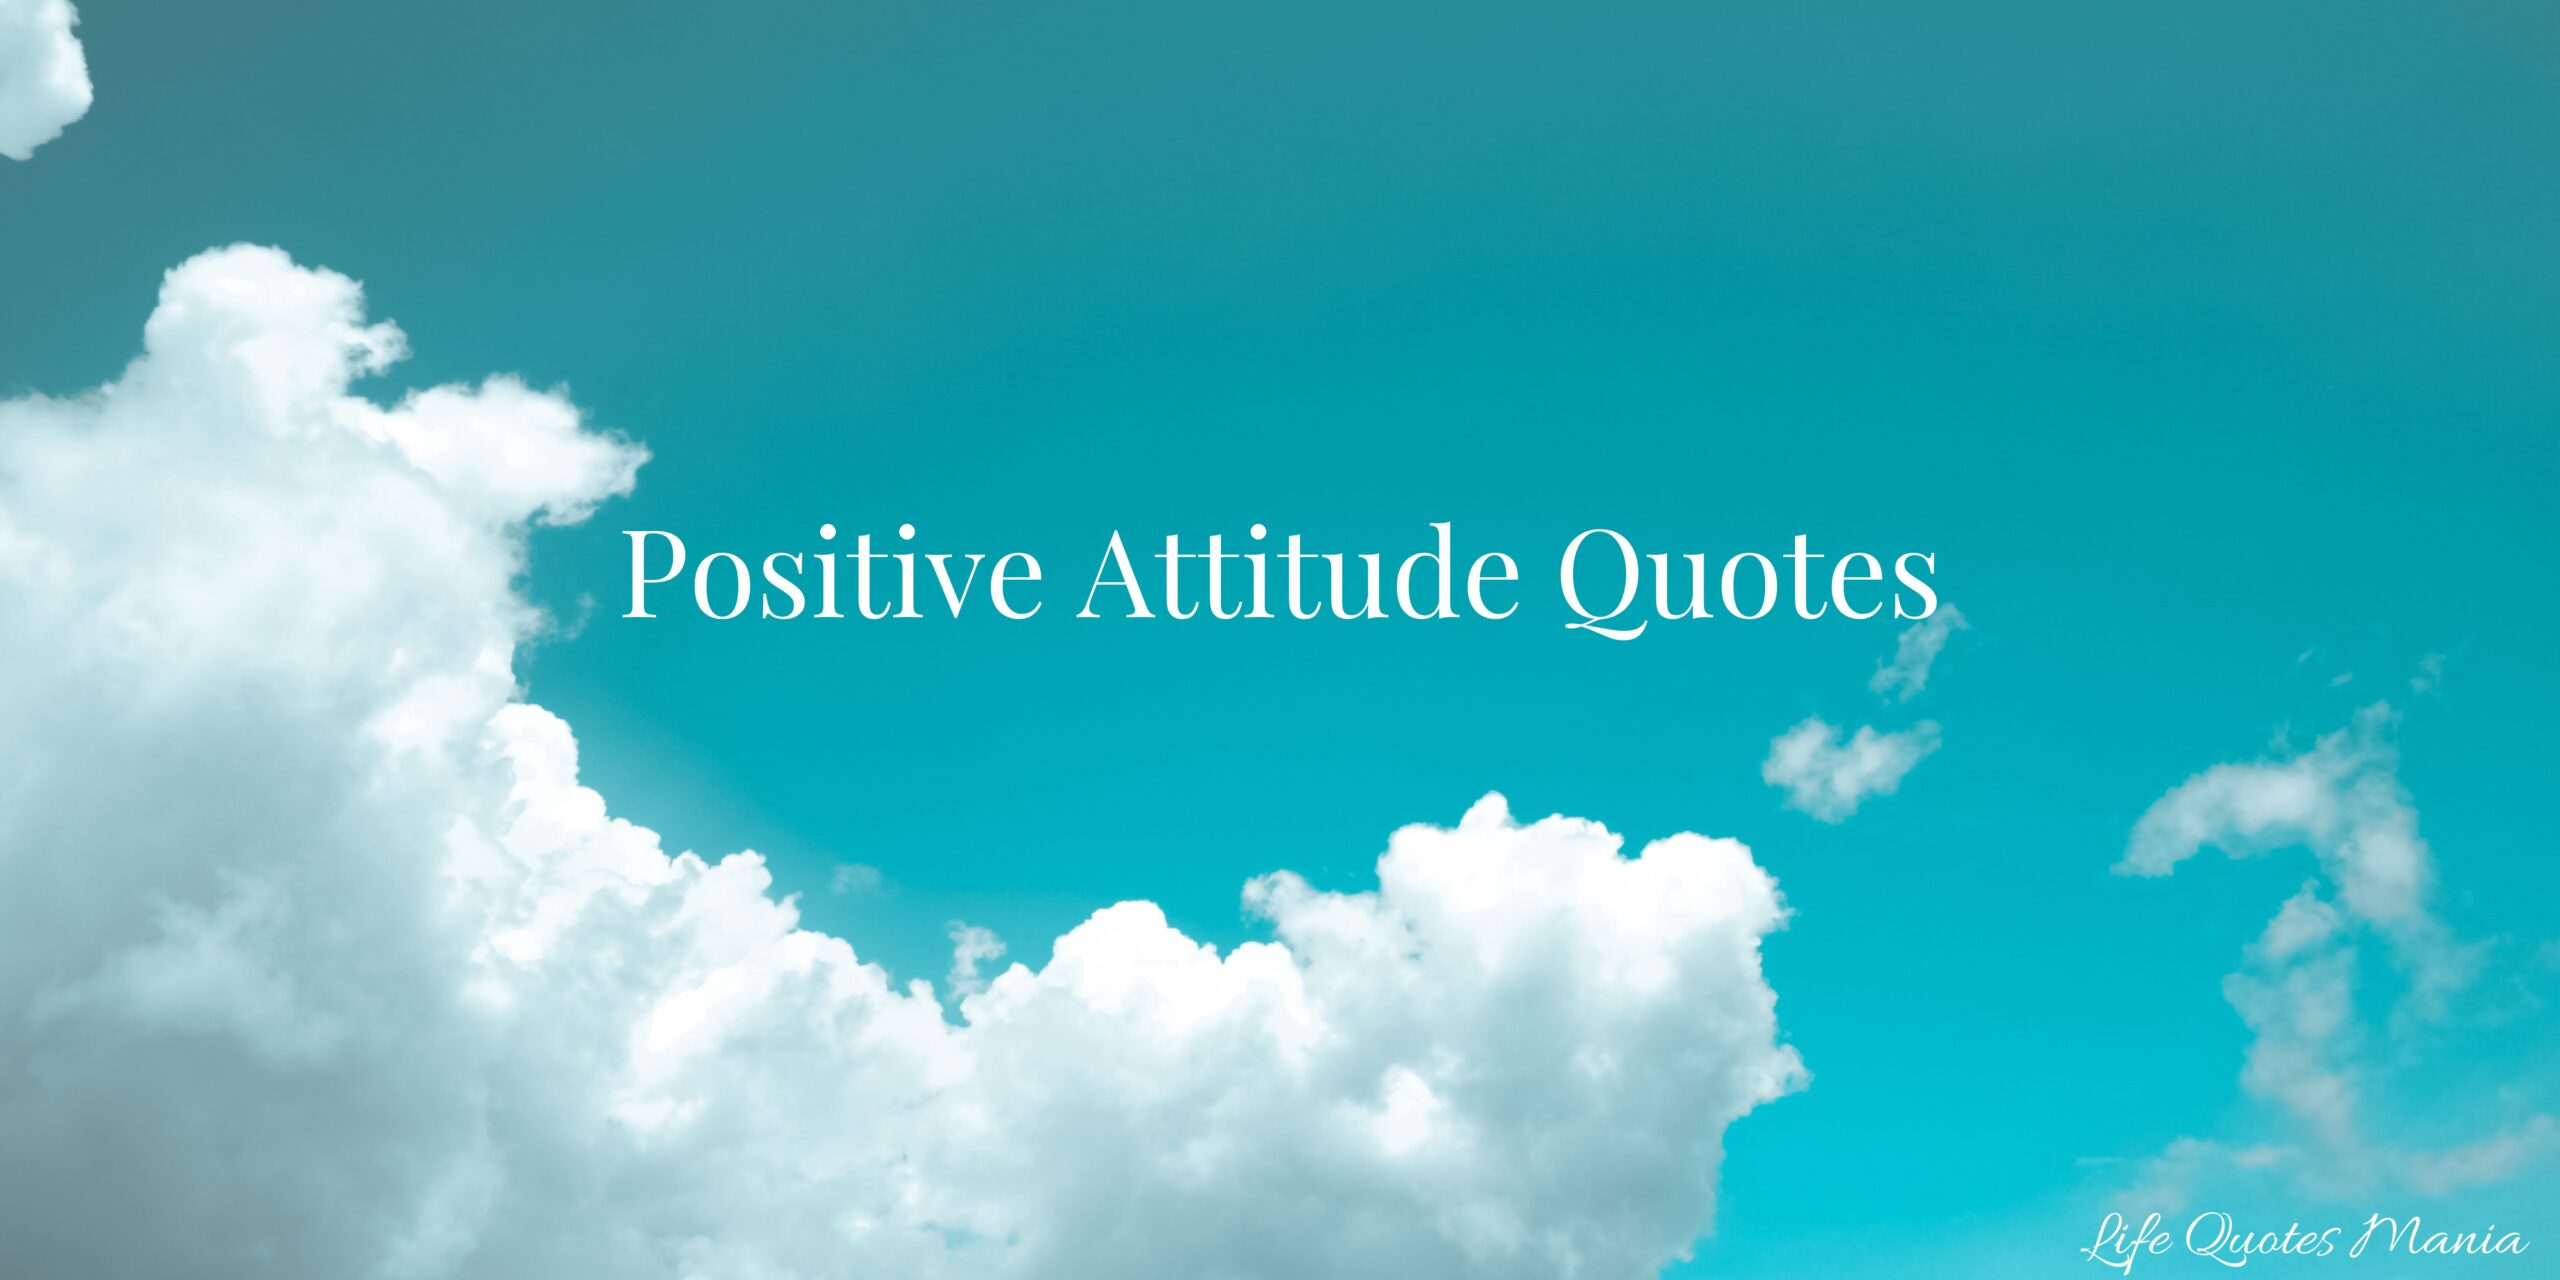 Positive Attitude Quotes to Build a Great Mindset - Life Quotes Mania